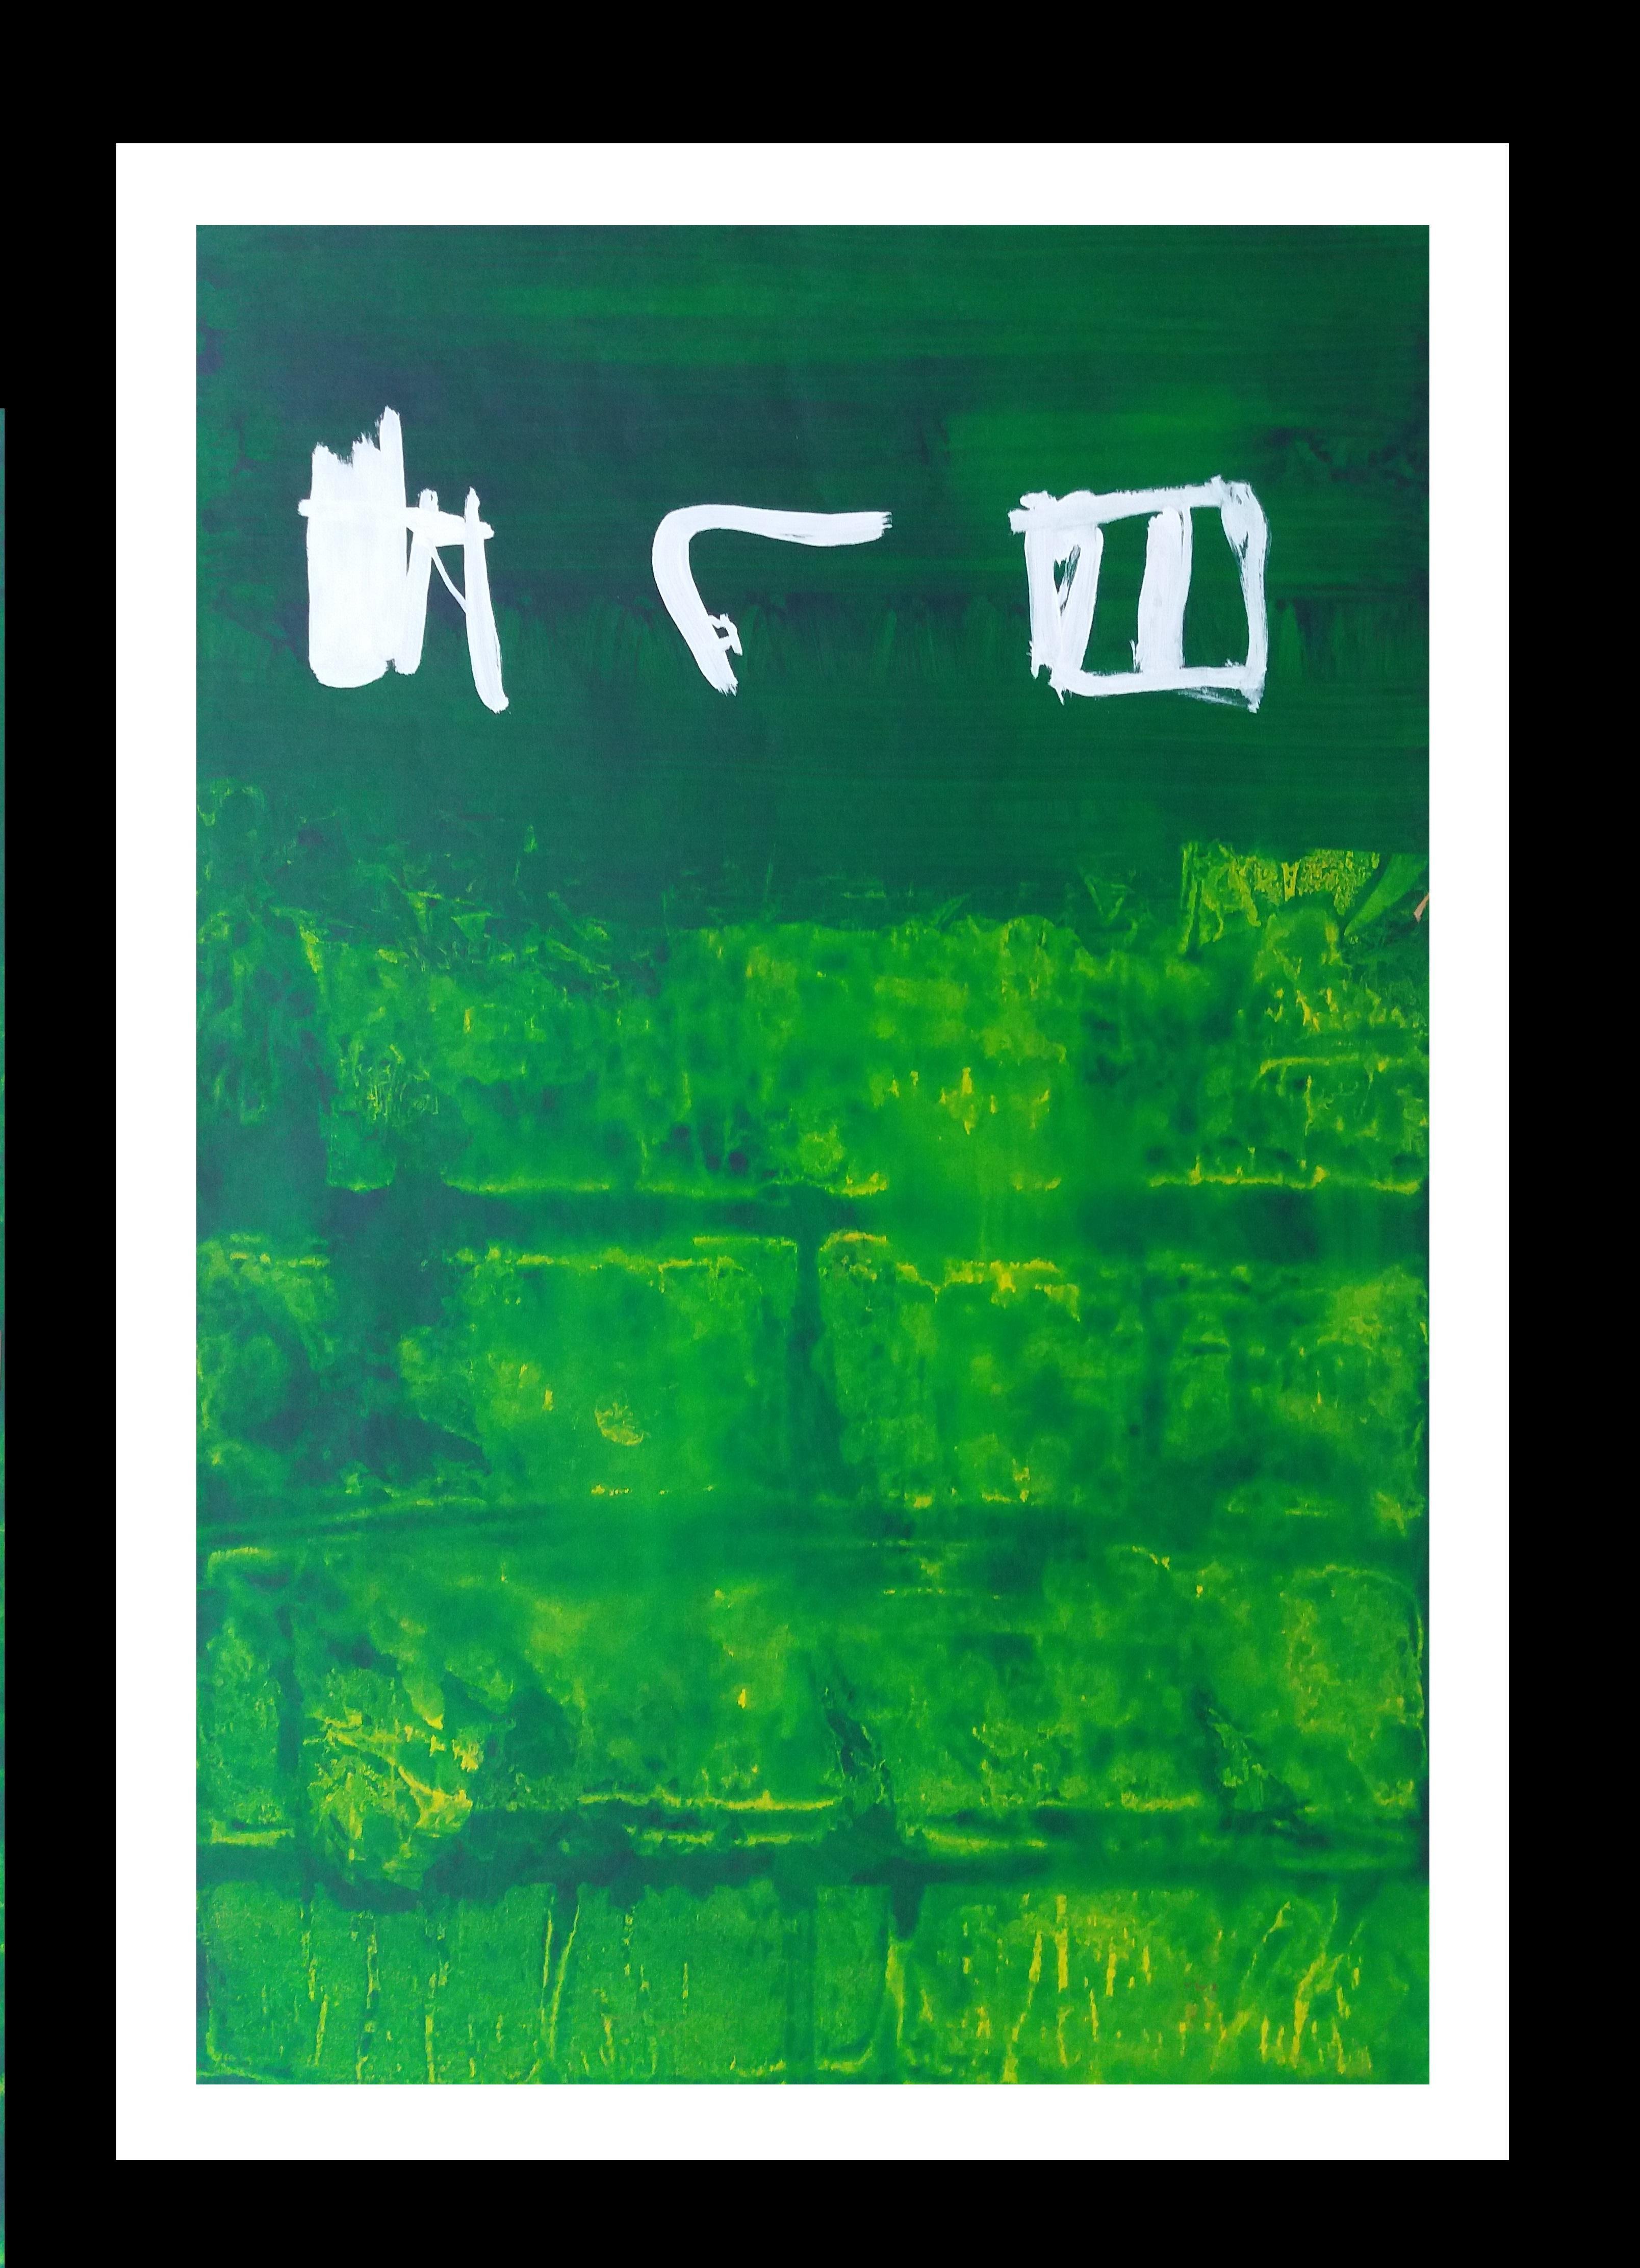 RAFAEL RUZ Abstract Painting - Ruz  Vertical Green abstract  Landscapes   Acrylic on paper 